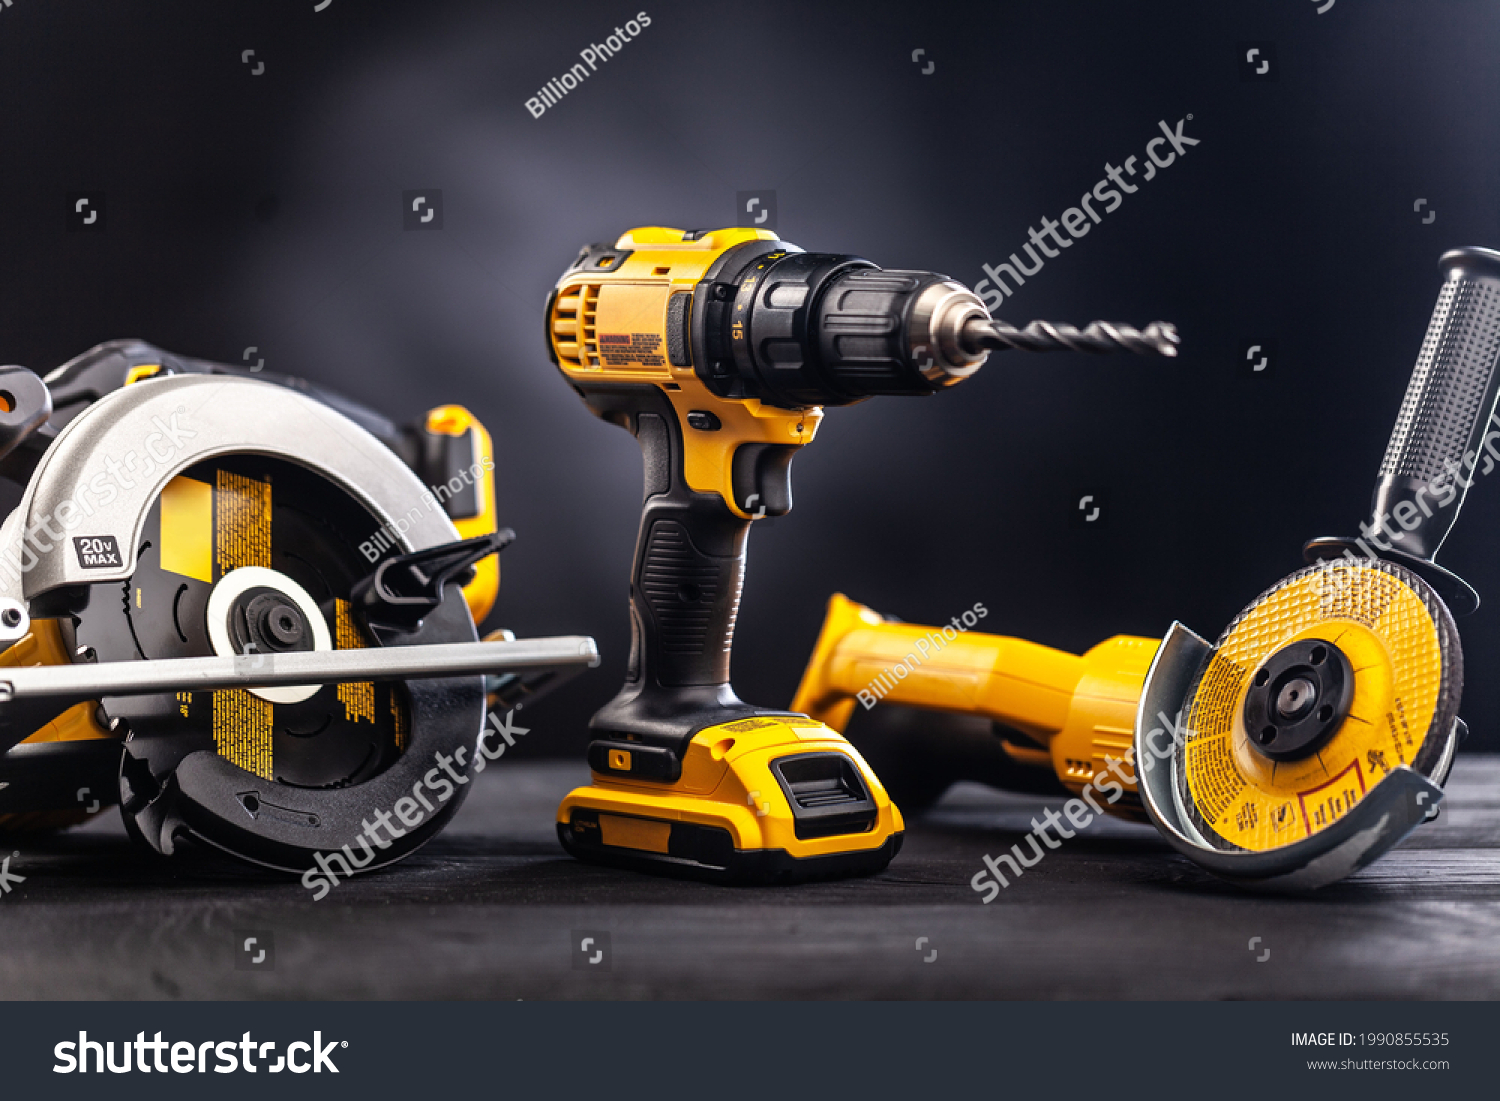 Construction carpentry tools electric corded circular saw cordless drill on background #1990855535